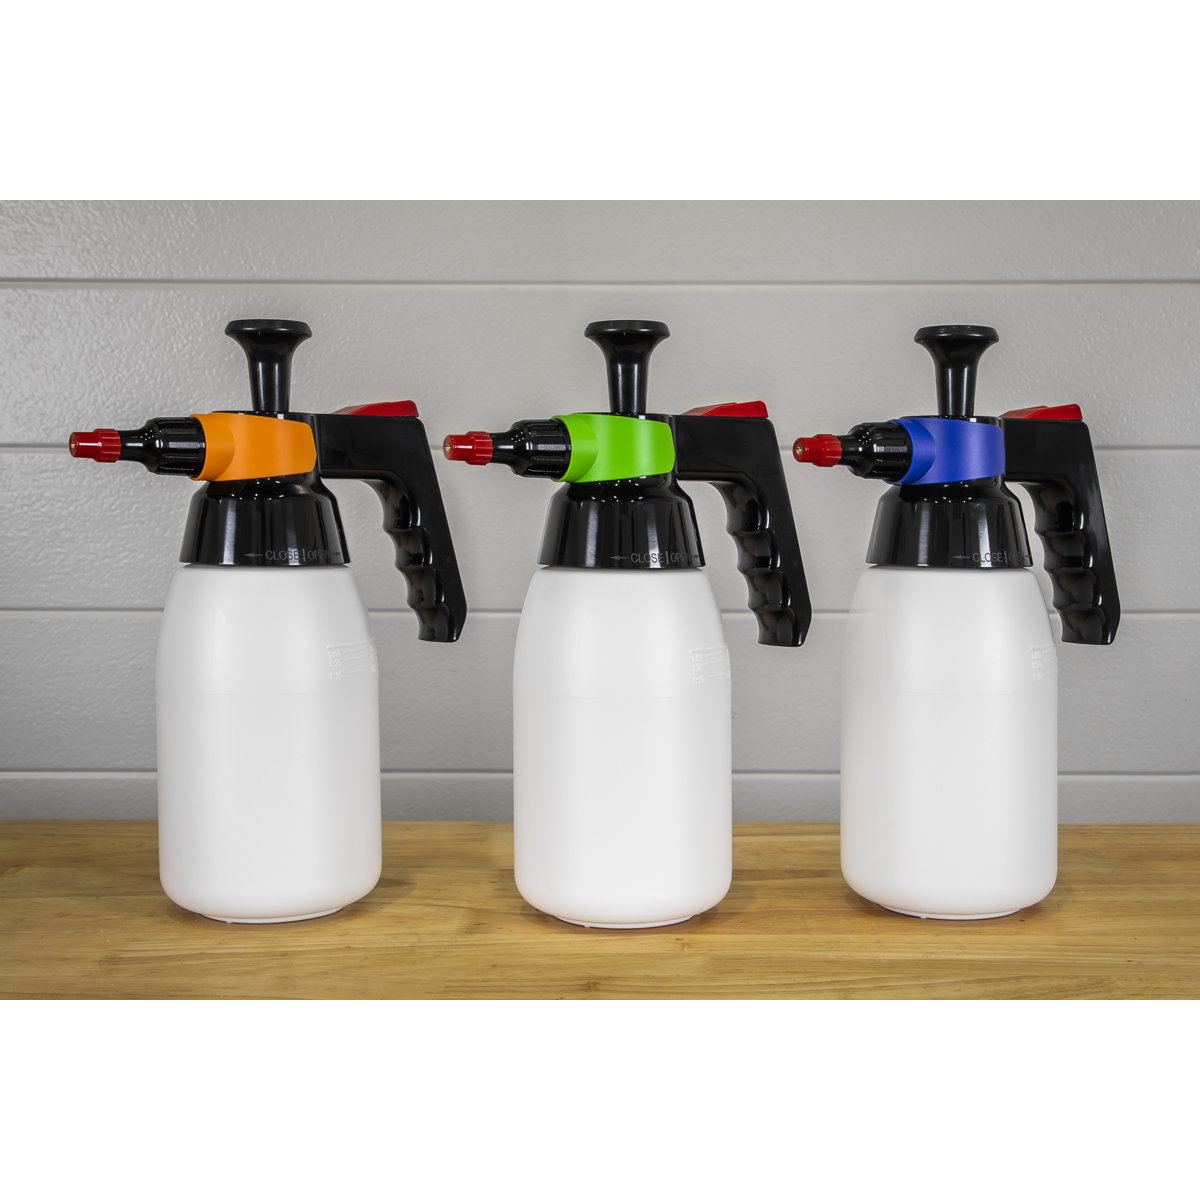 Sealey colour coded pressure sprayer for easy identification and safety